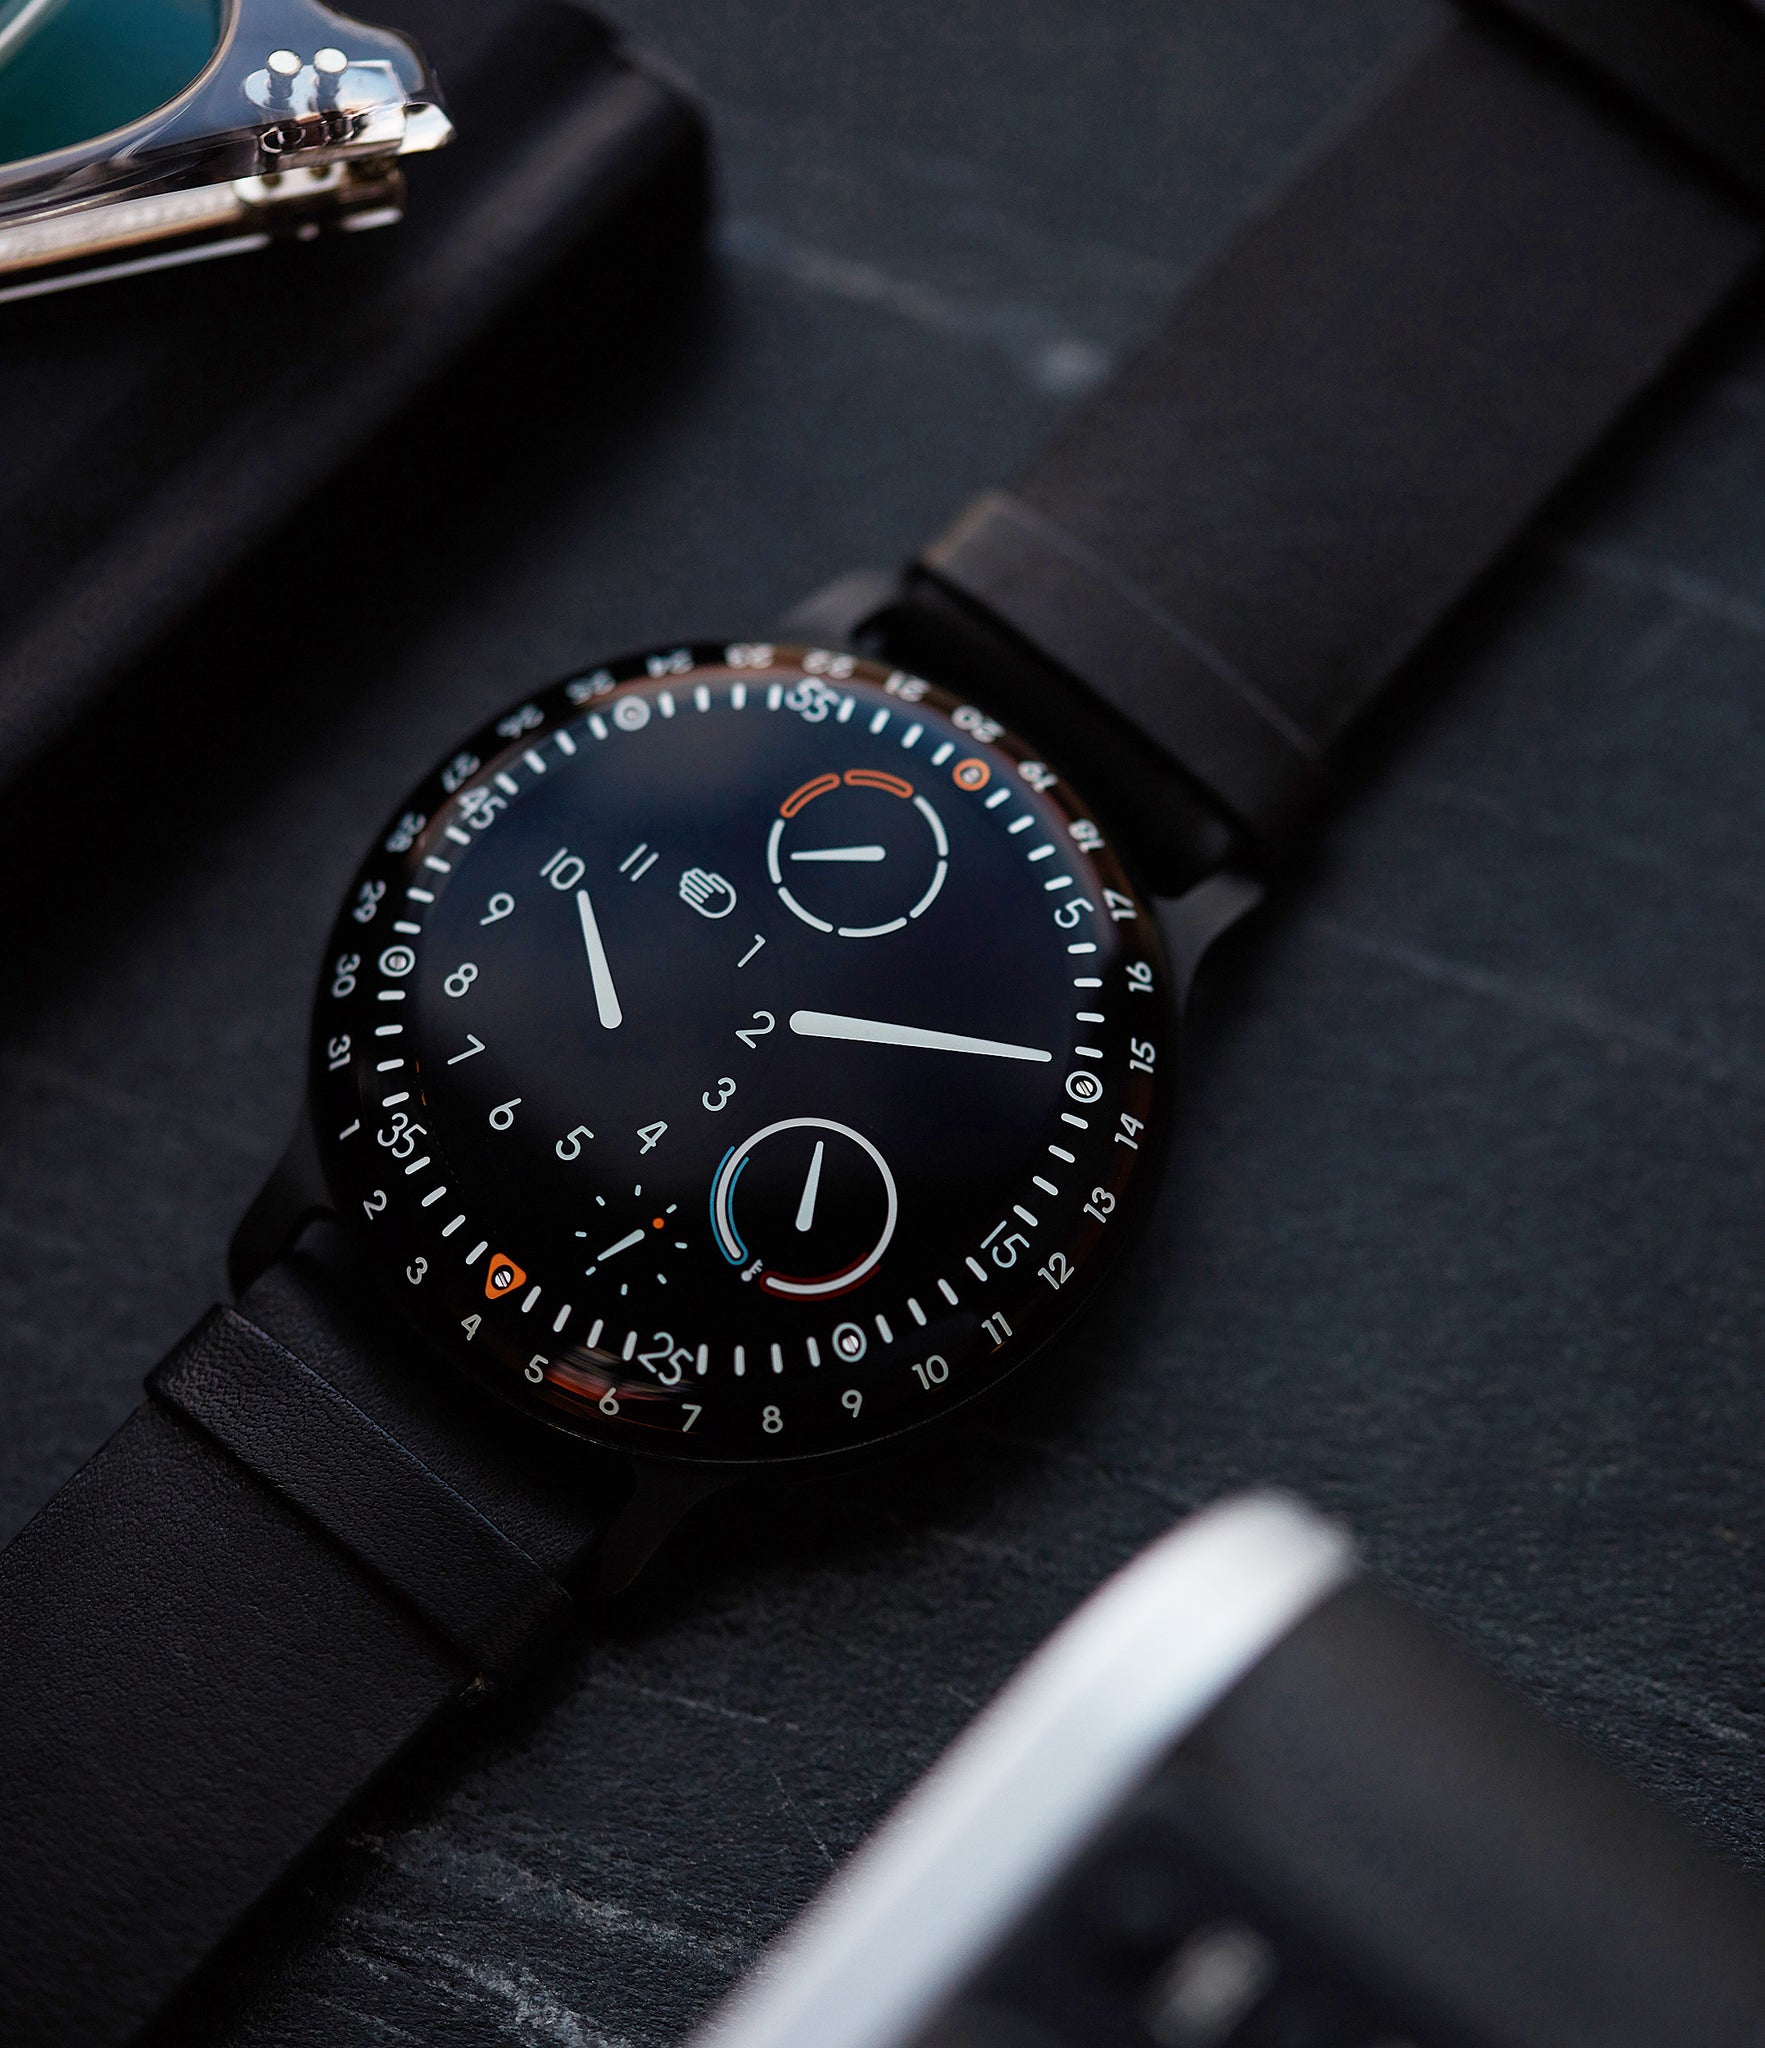 The Ressence Type 3 features both a highly unusual display and an almost unique construction. Available online at A Collected Man London